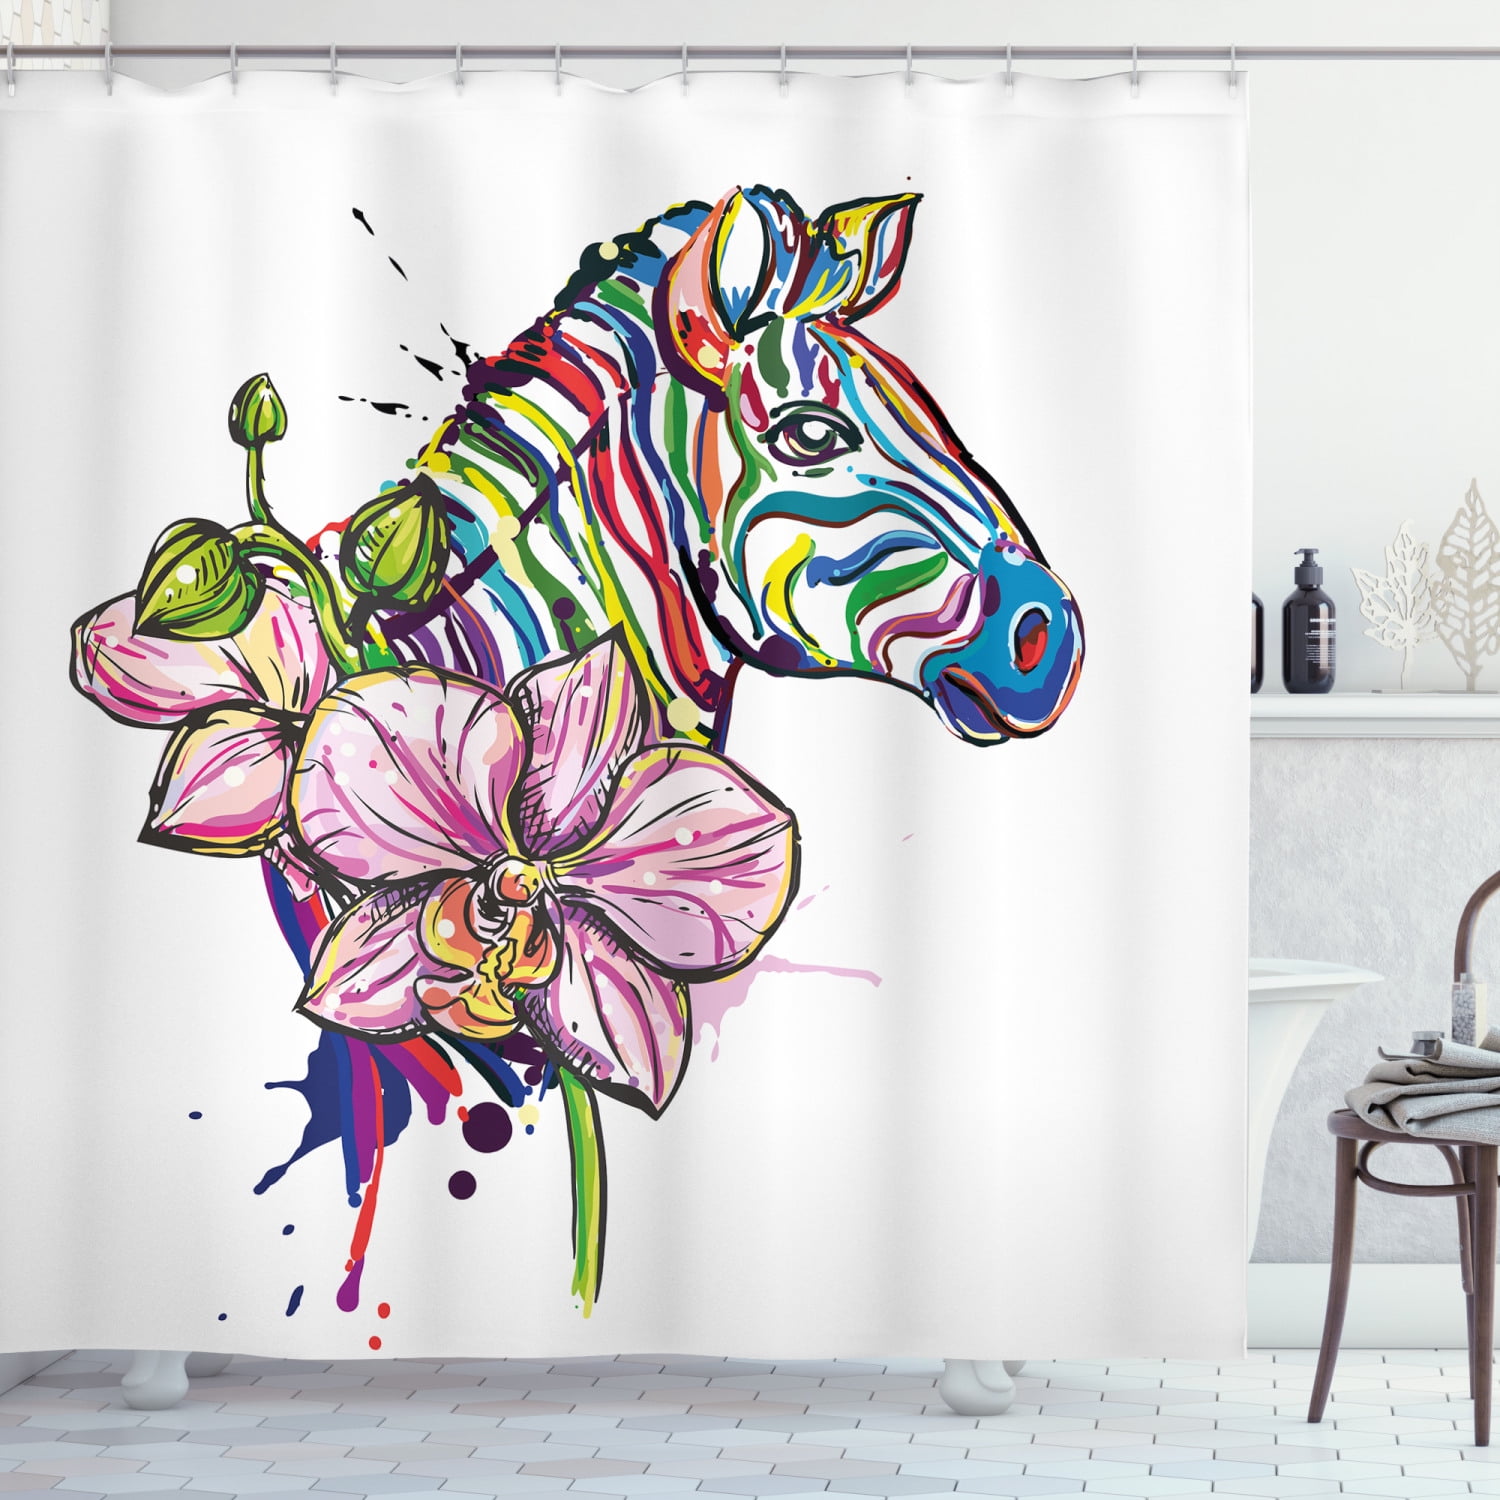 Colored Zebra Abstract Art Design Custom Shower Curtain Polyester Fabric 12 Hook 